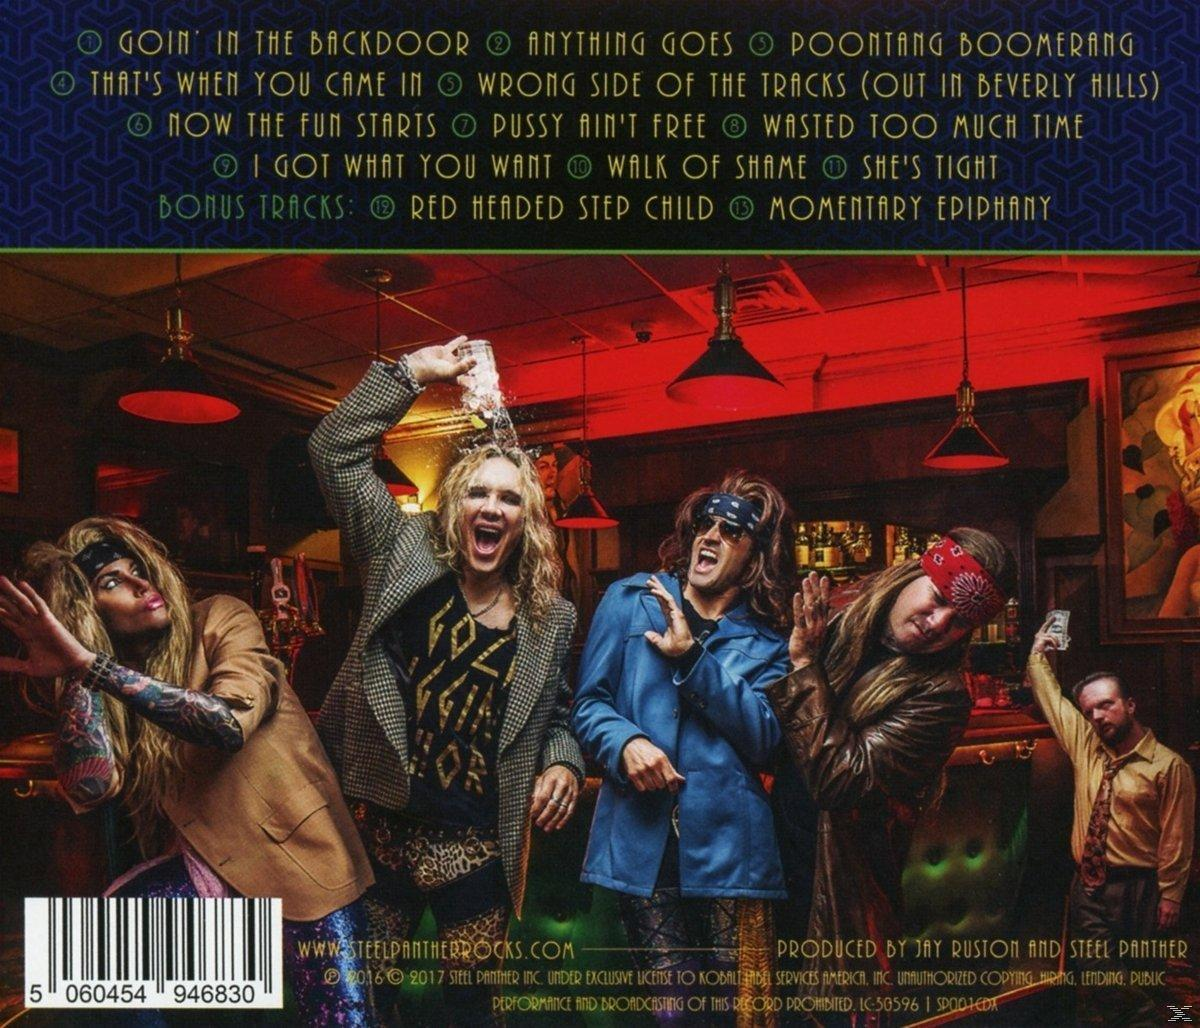 Steel Panther - LOWER EDITION) THE BAR (CD) (DELUXE 